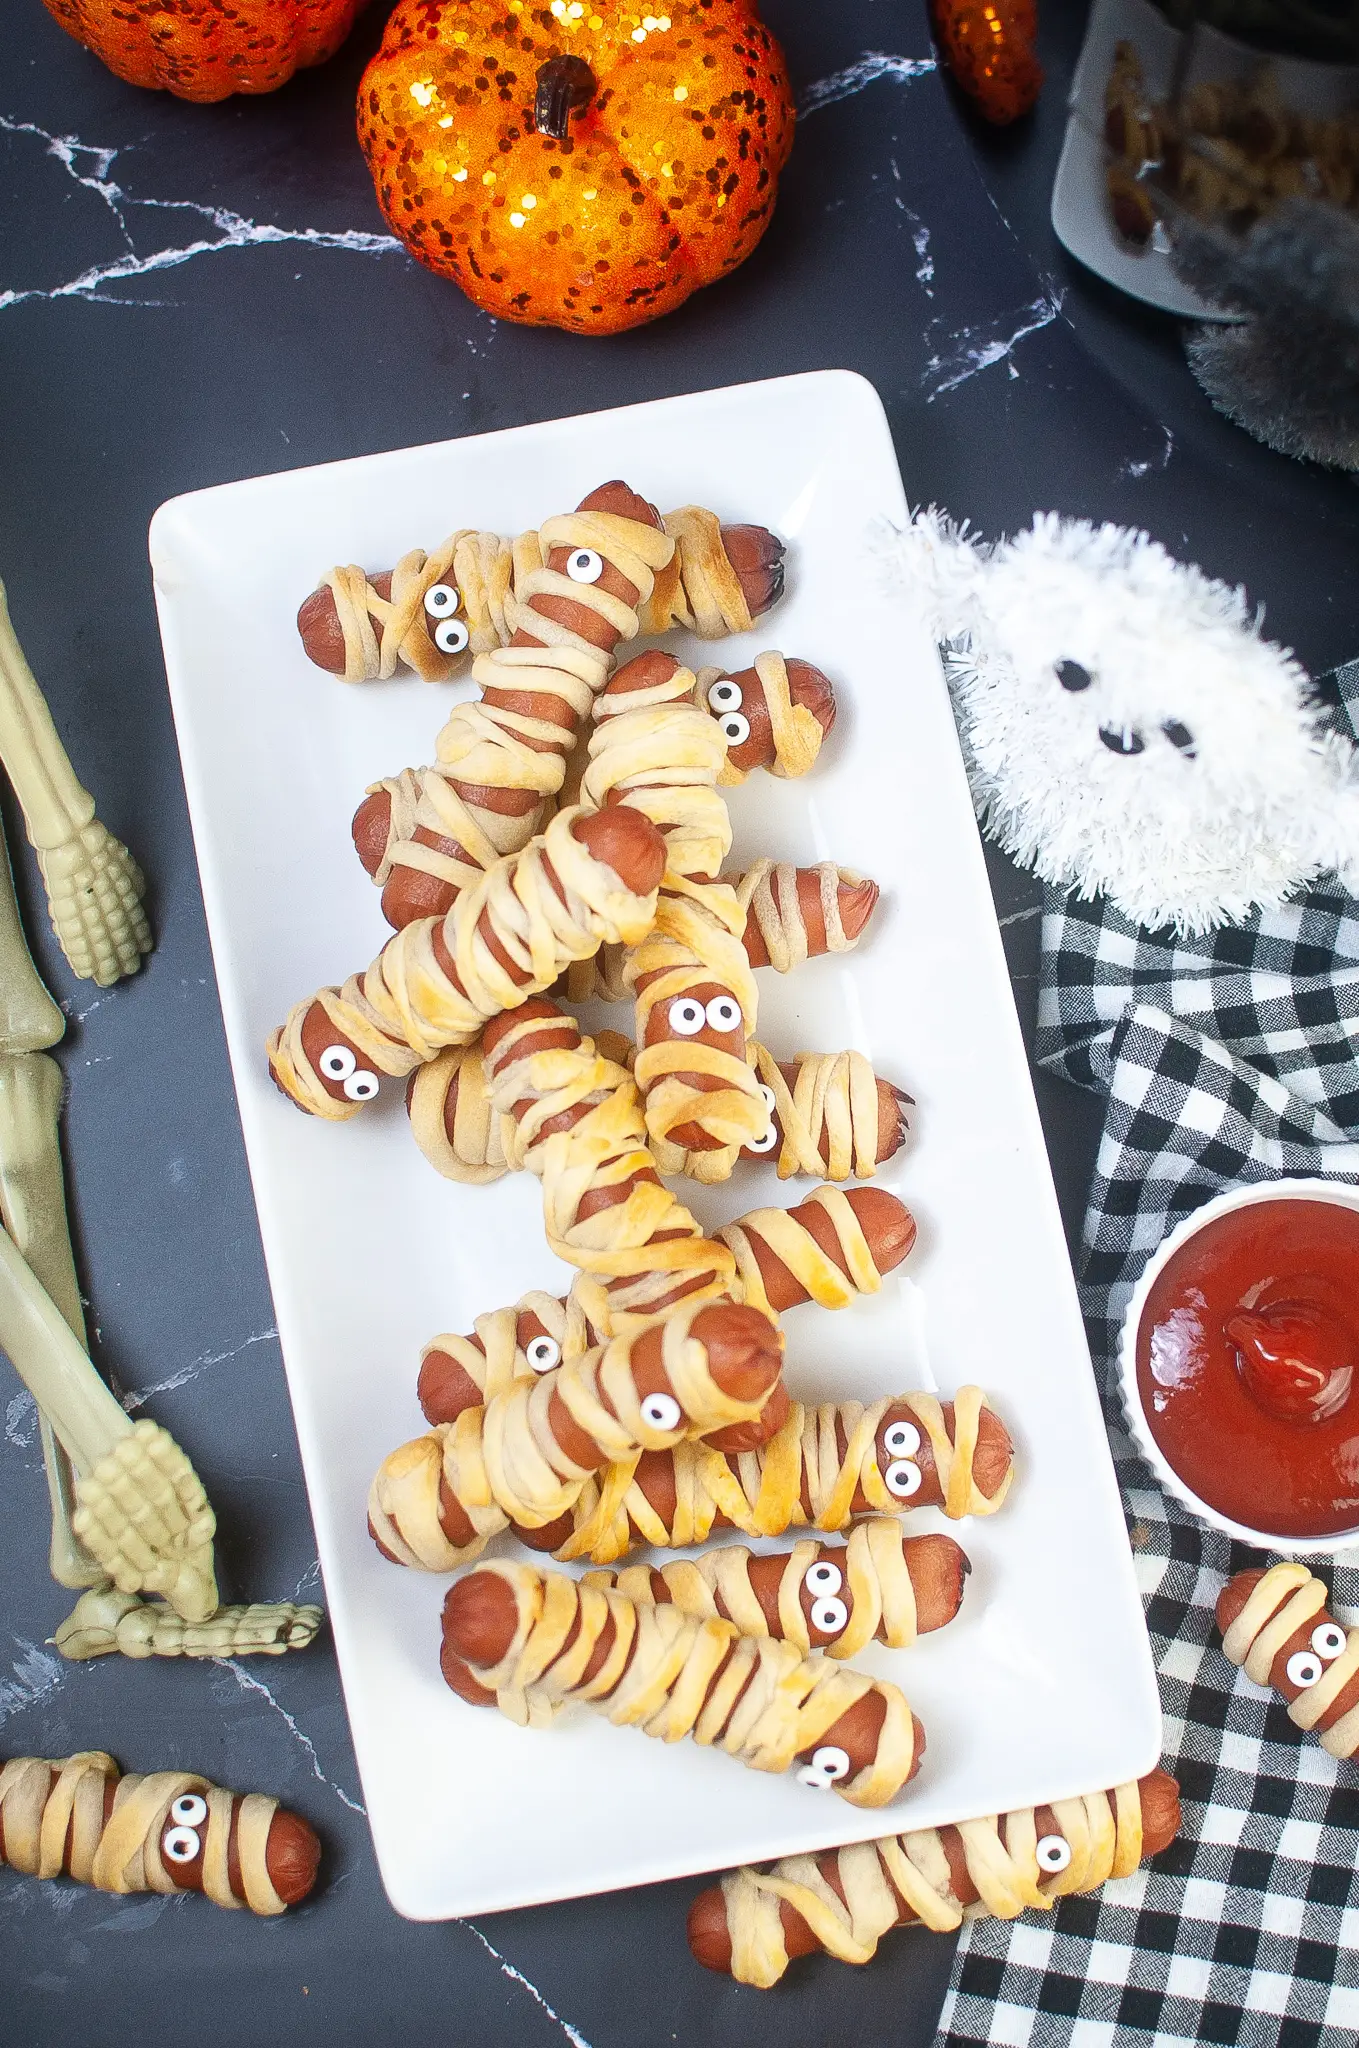 Mummy Dogs on a plate